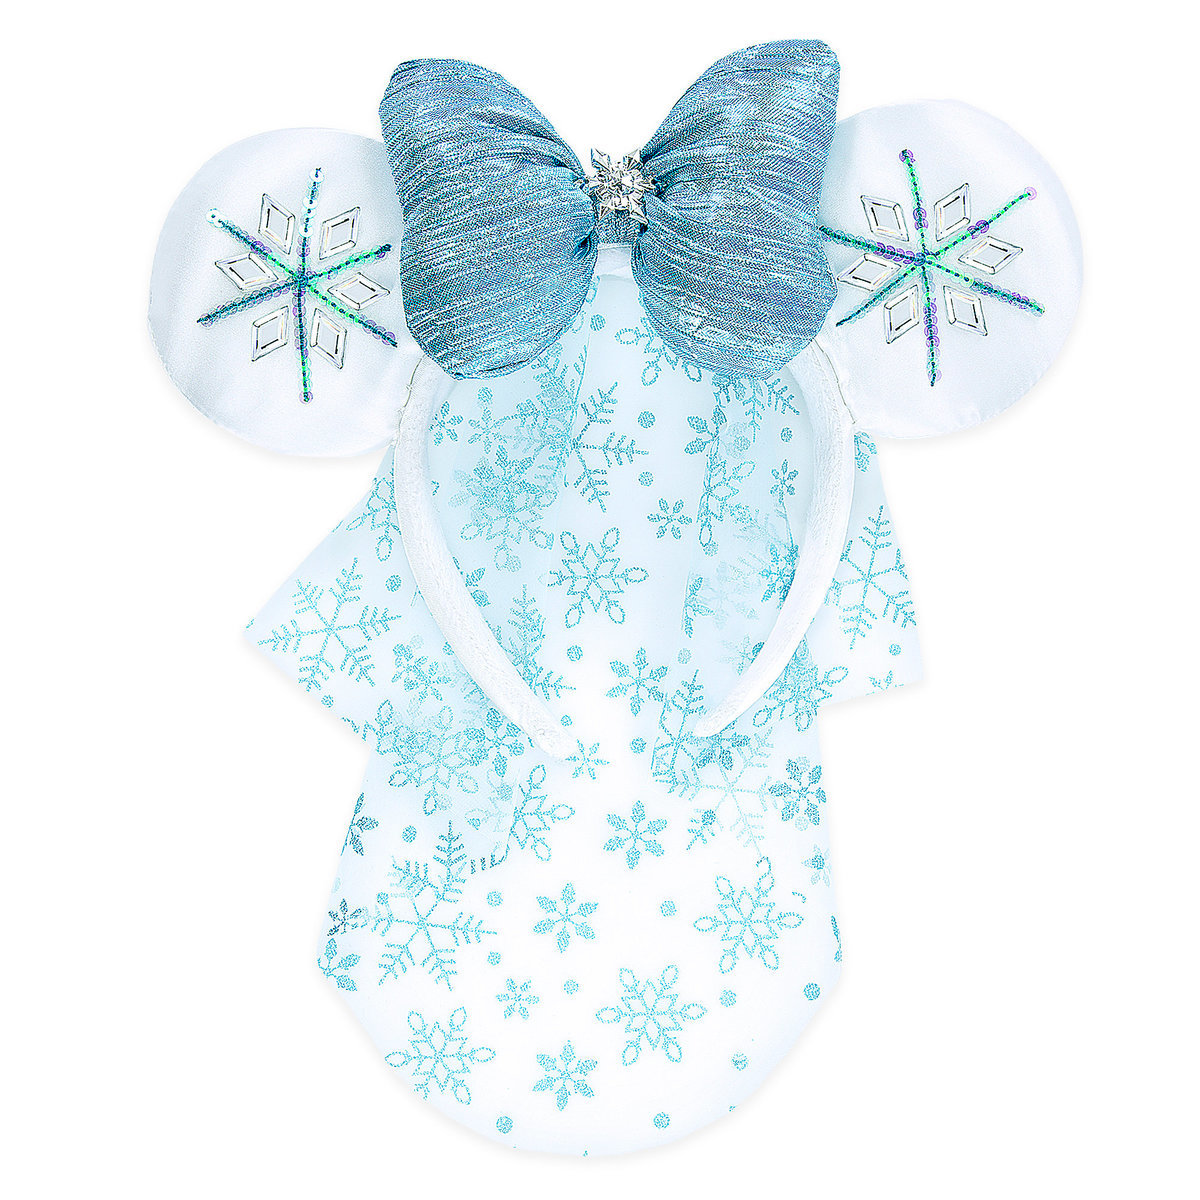 Disney Parks Christmas Minnie Mouse Snowflake Ear Headband Holiday New with Tags